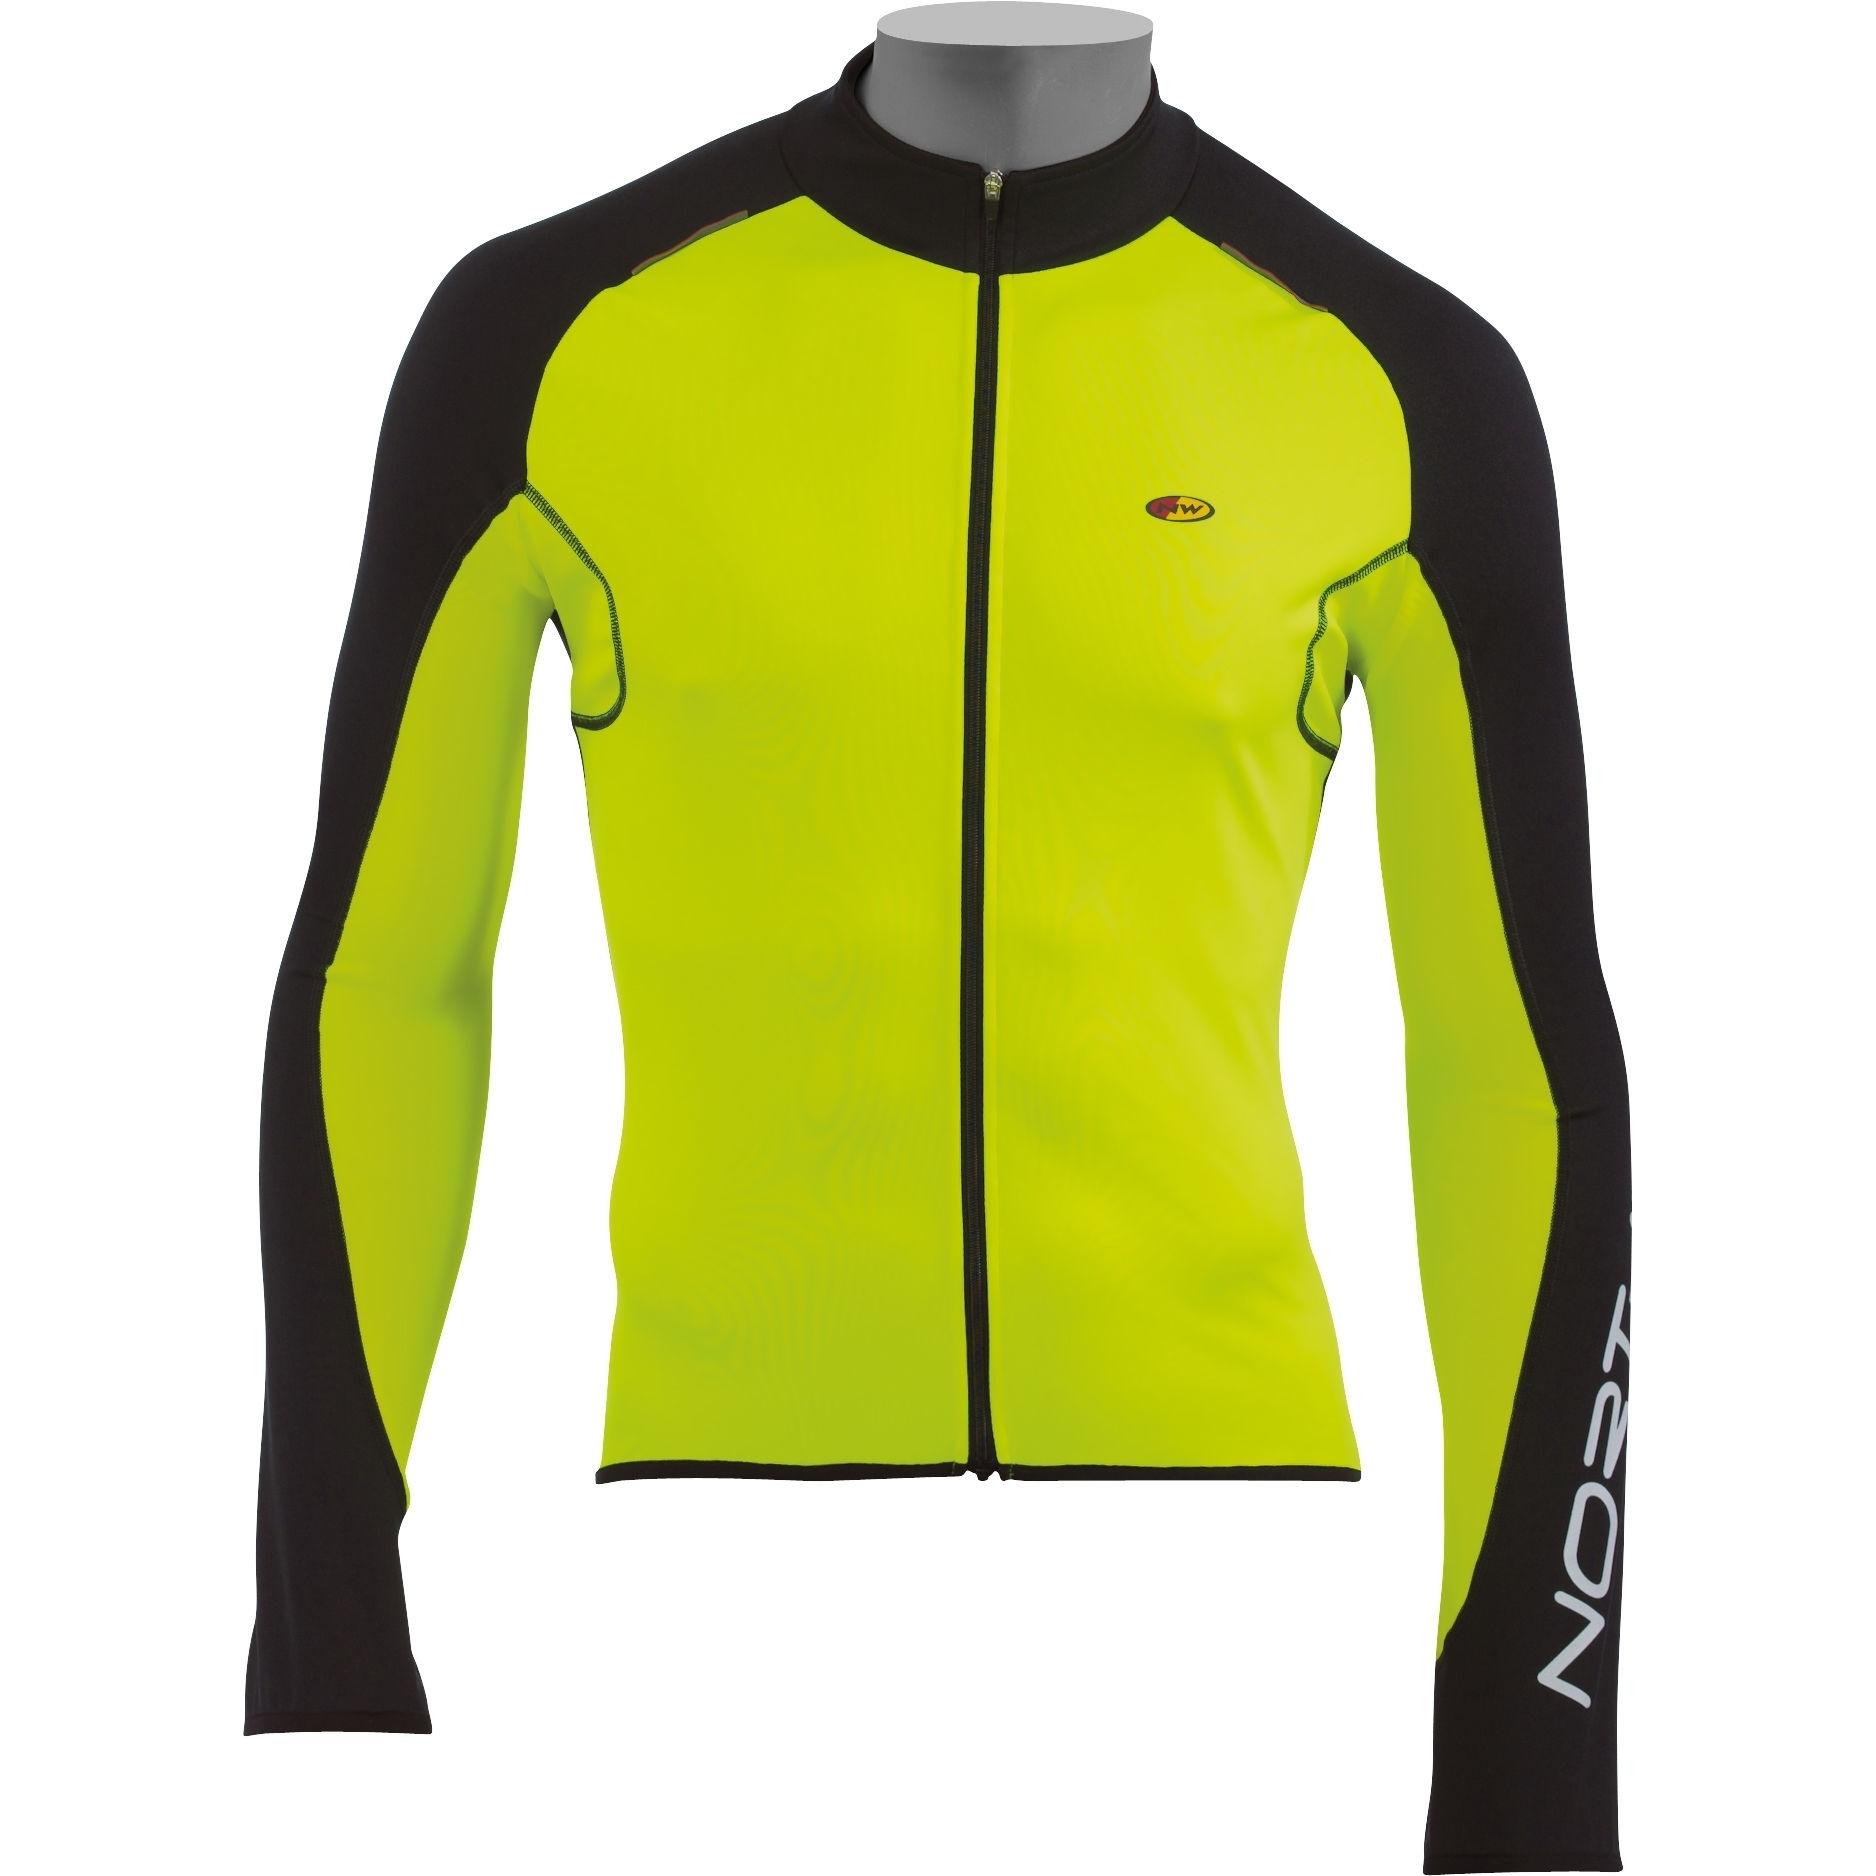 Foto Northwave Blade Jersey Long Sleeve -front protection - yellow/black